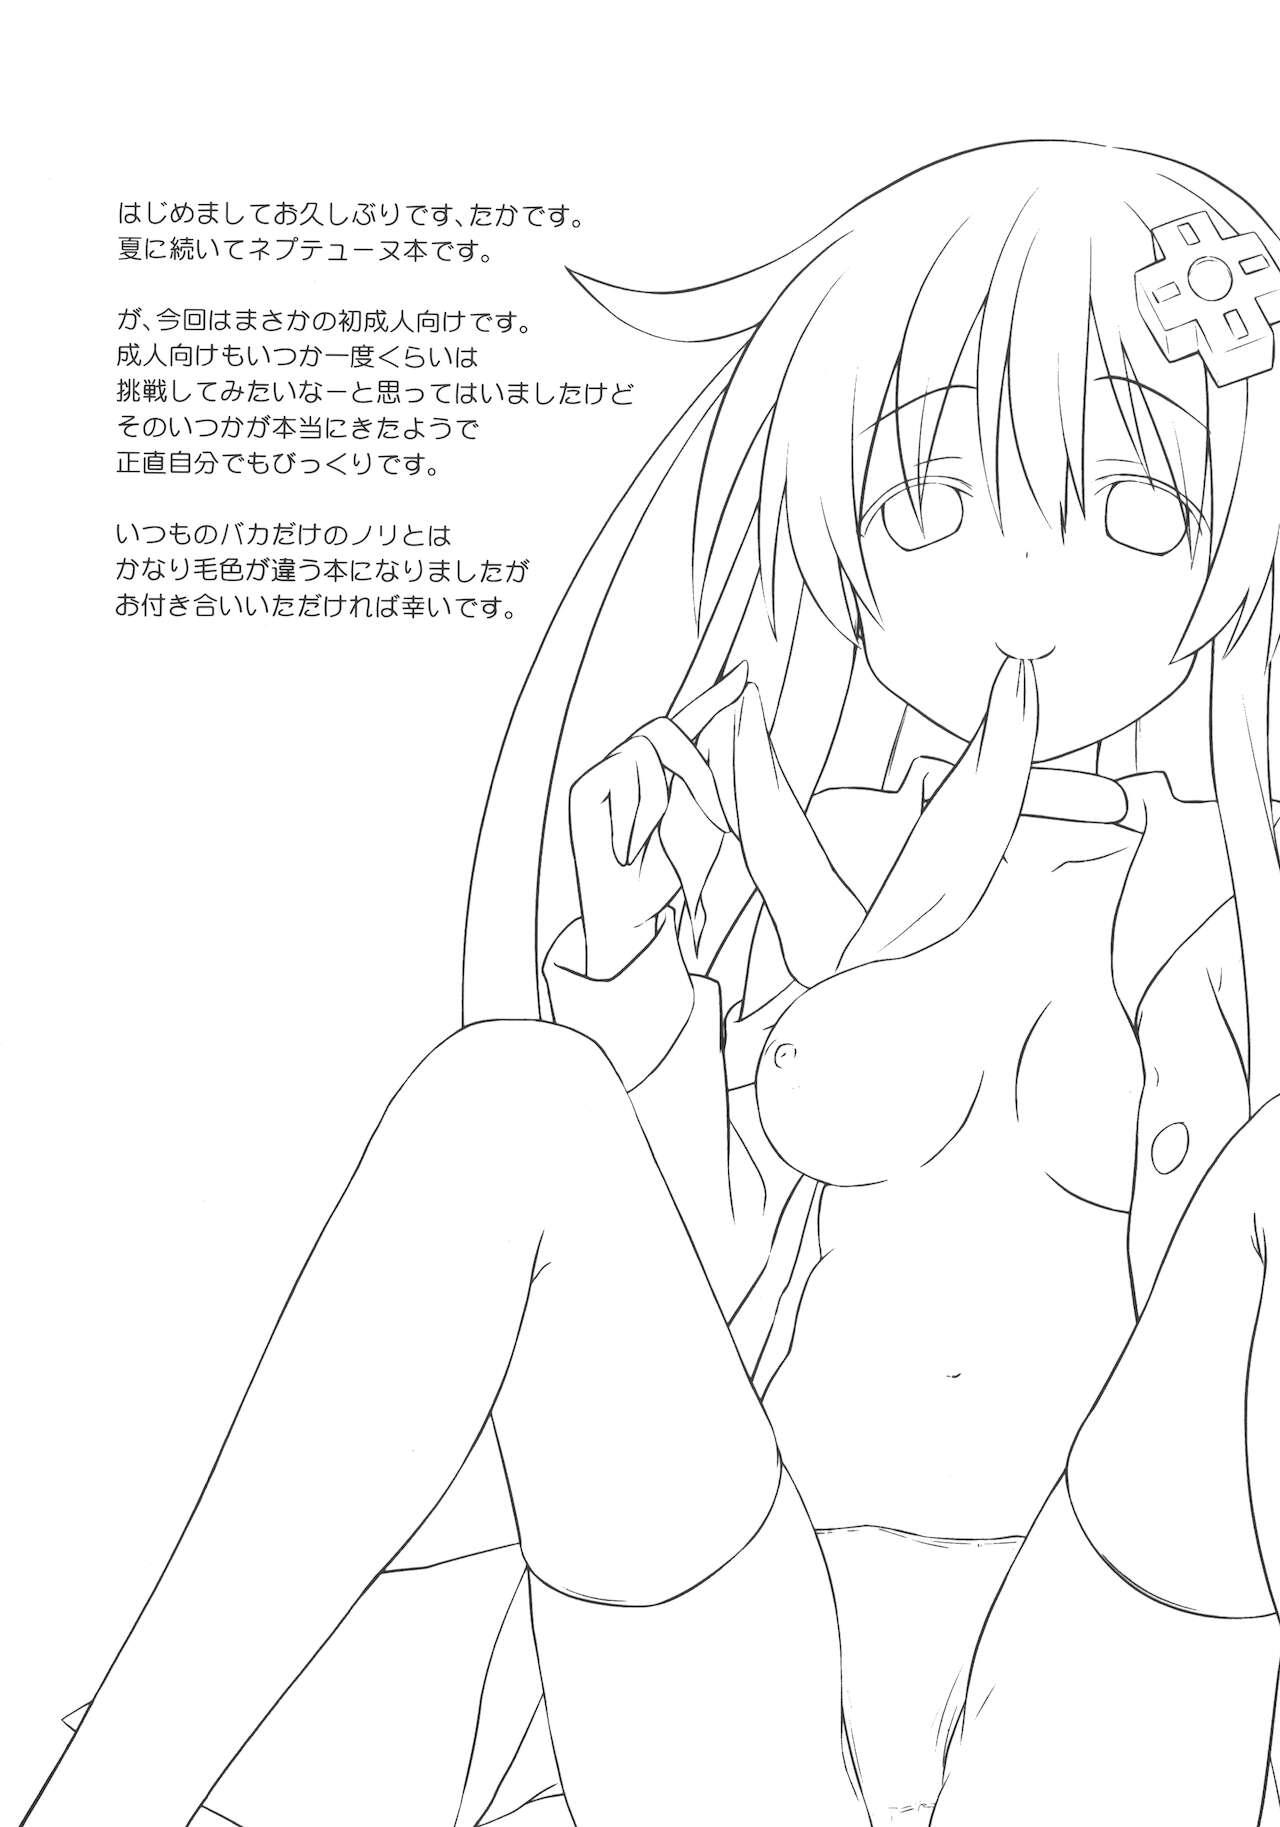 A certain Nepgear was harmed in the making of this doujinshi 3